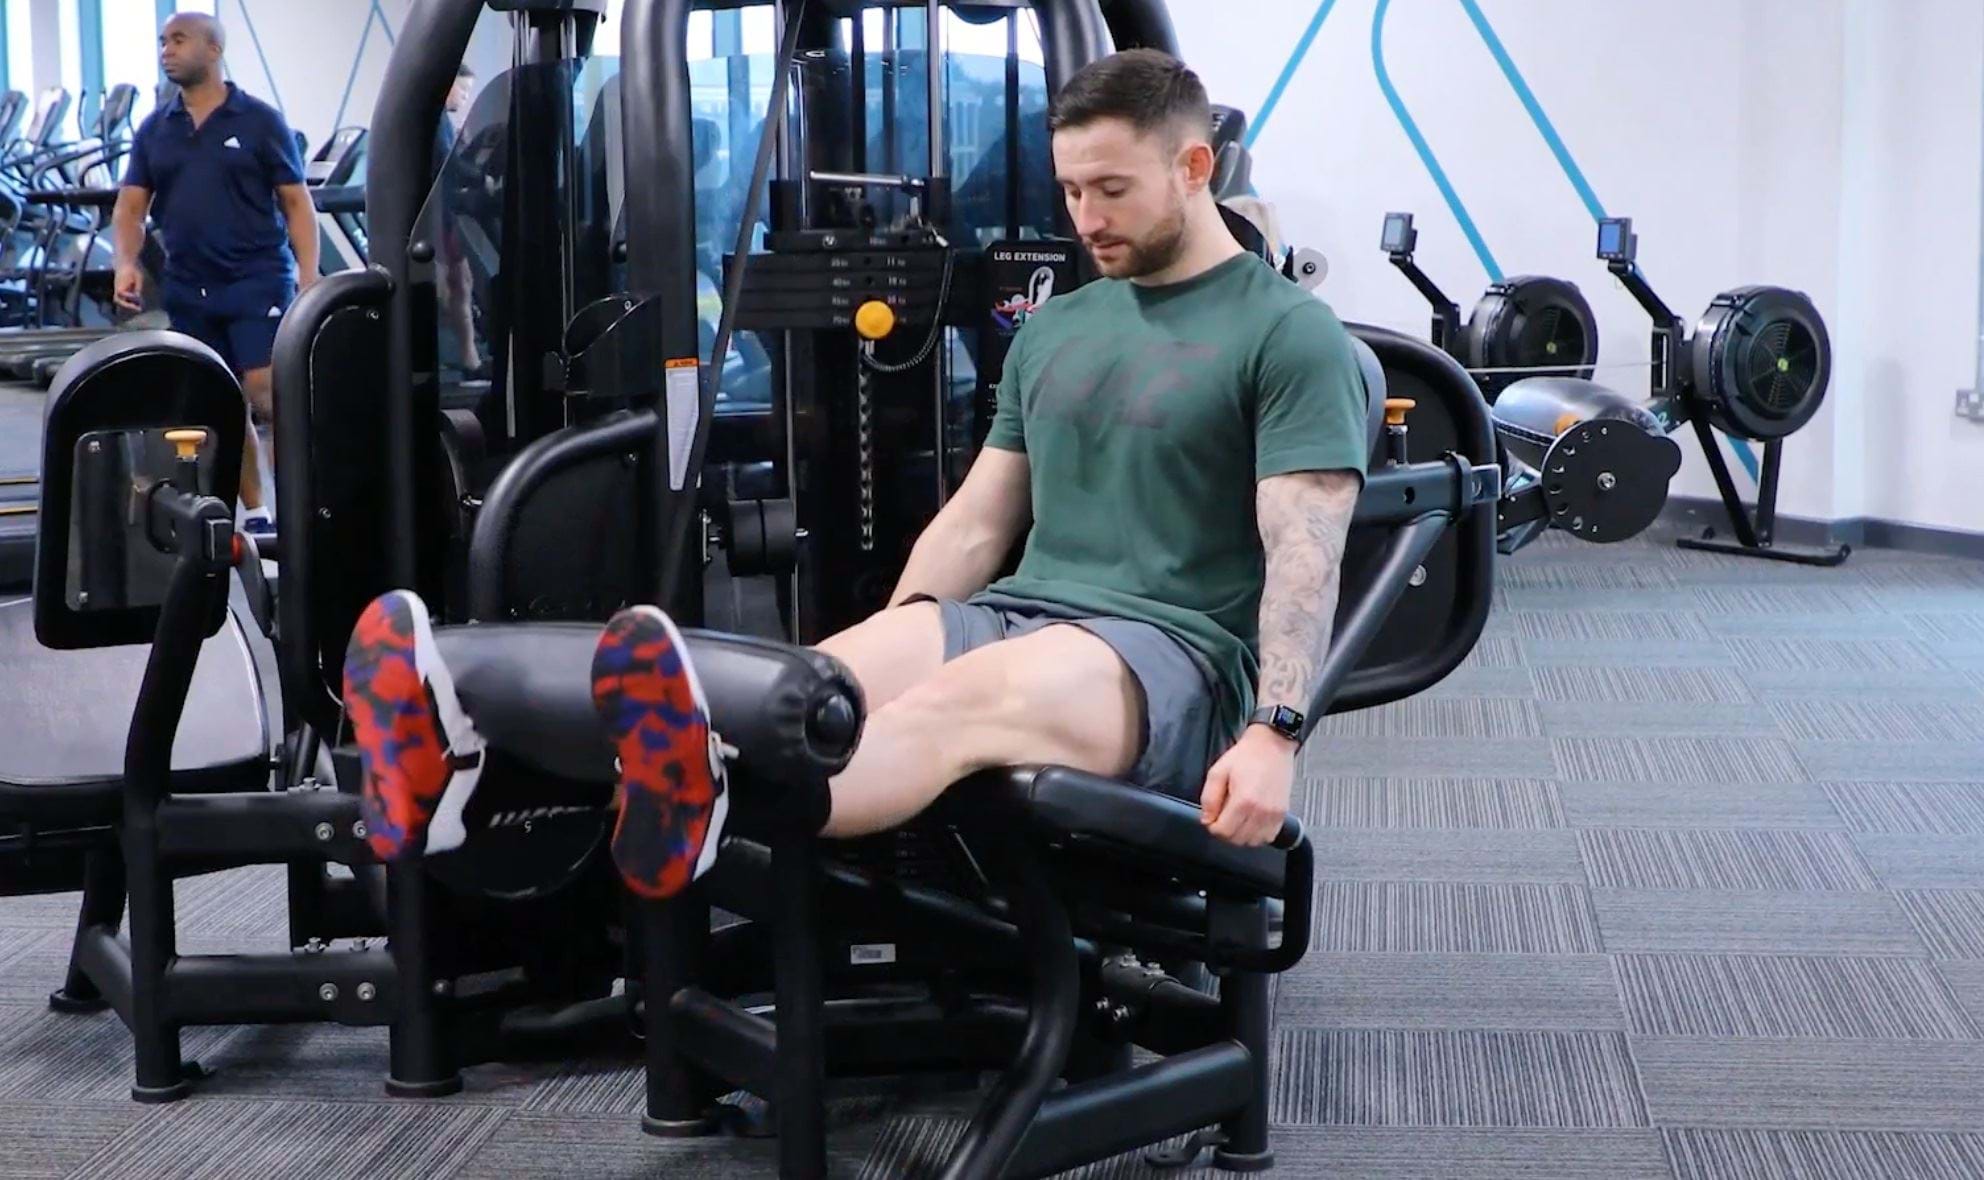 Leg Extensions - Quadriceps Exercise Guide with Photos